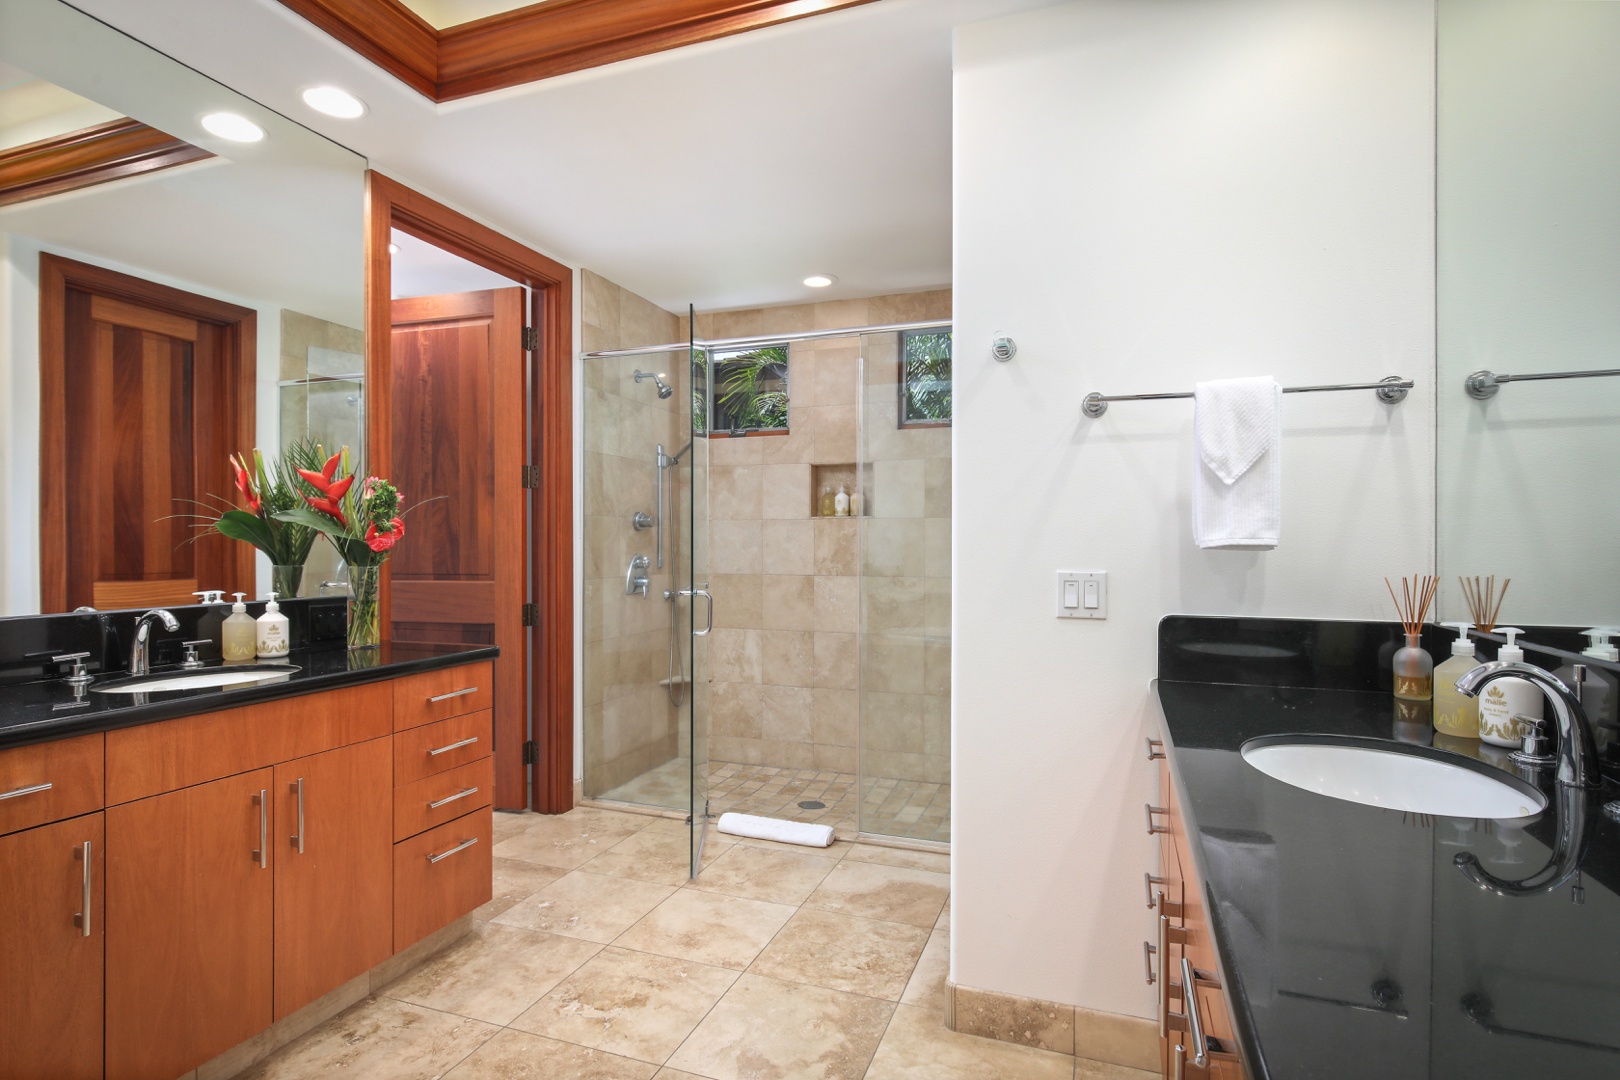 Kailua Kona Vacation Rentals, 4BD Pakui Street (147) Estate Home at Four Seasons Resort at Hualalai - Primary ensuite bath with dual sinks, large glass enclosed shower private W/C and soaking tub.